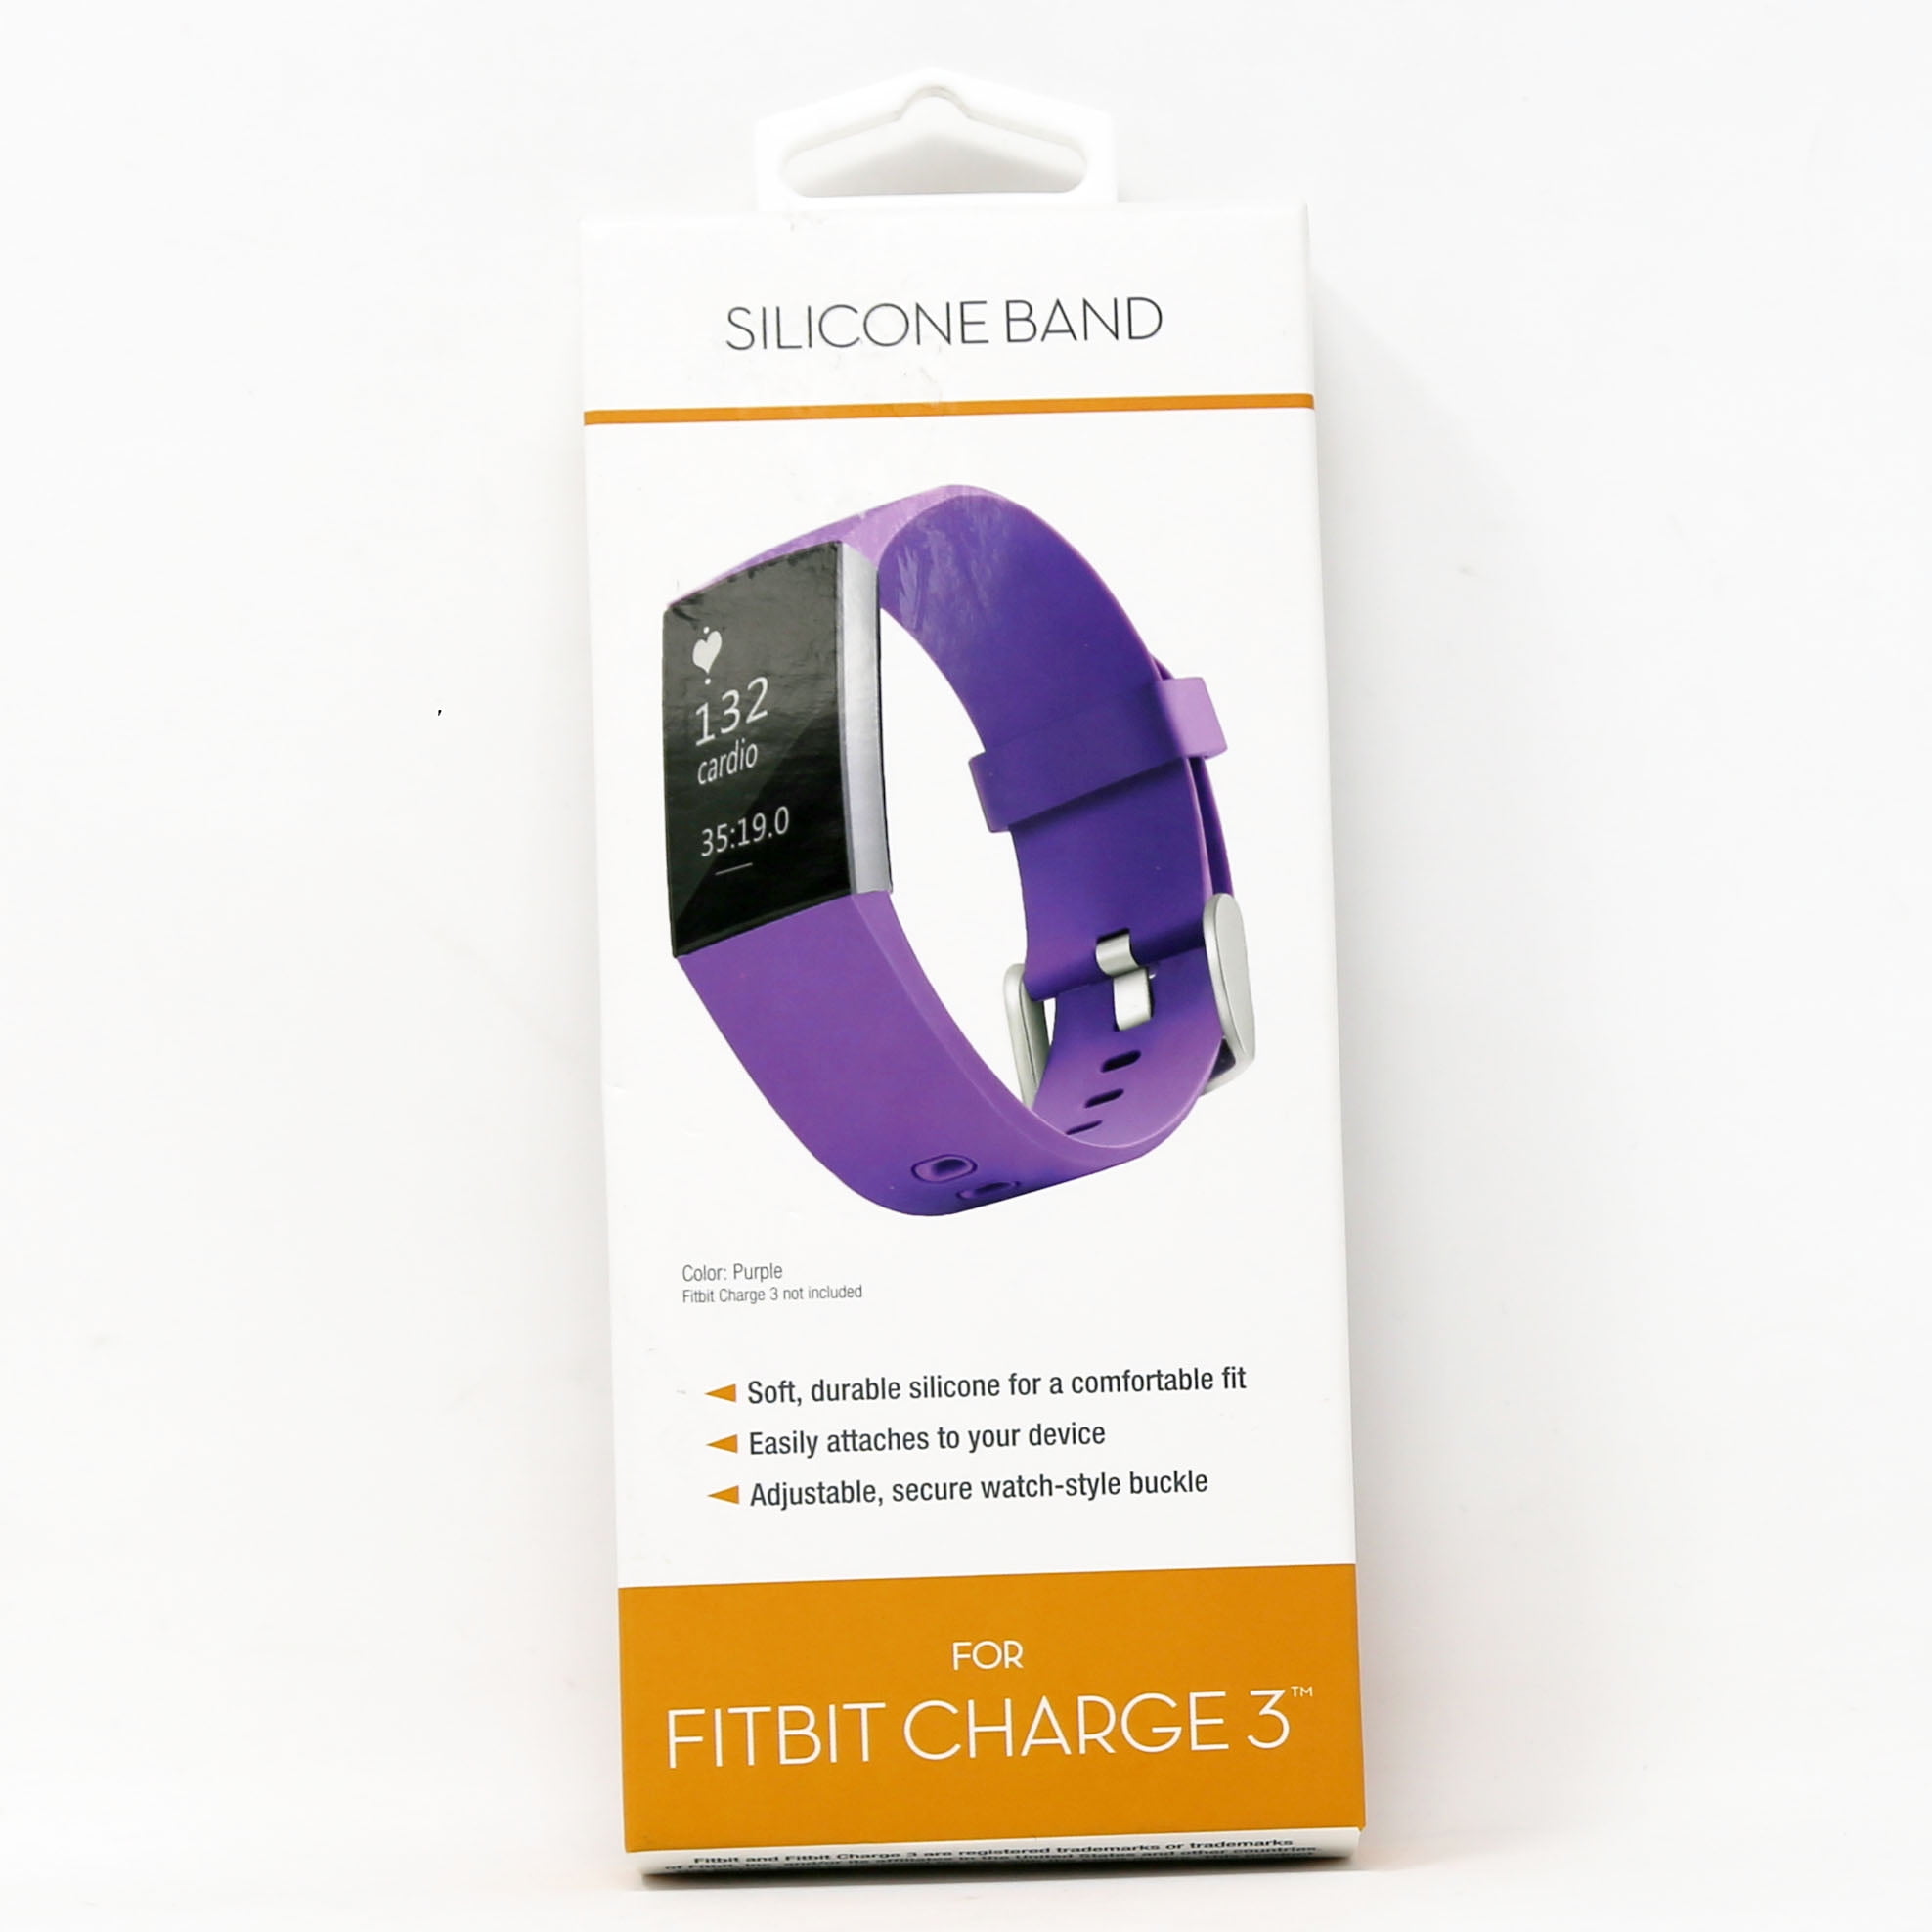 & Charge 3 for WITHit Band Silicone Charge 4 Black Fitbit®